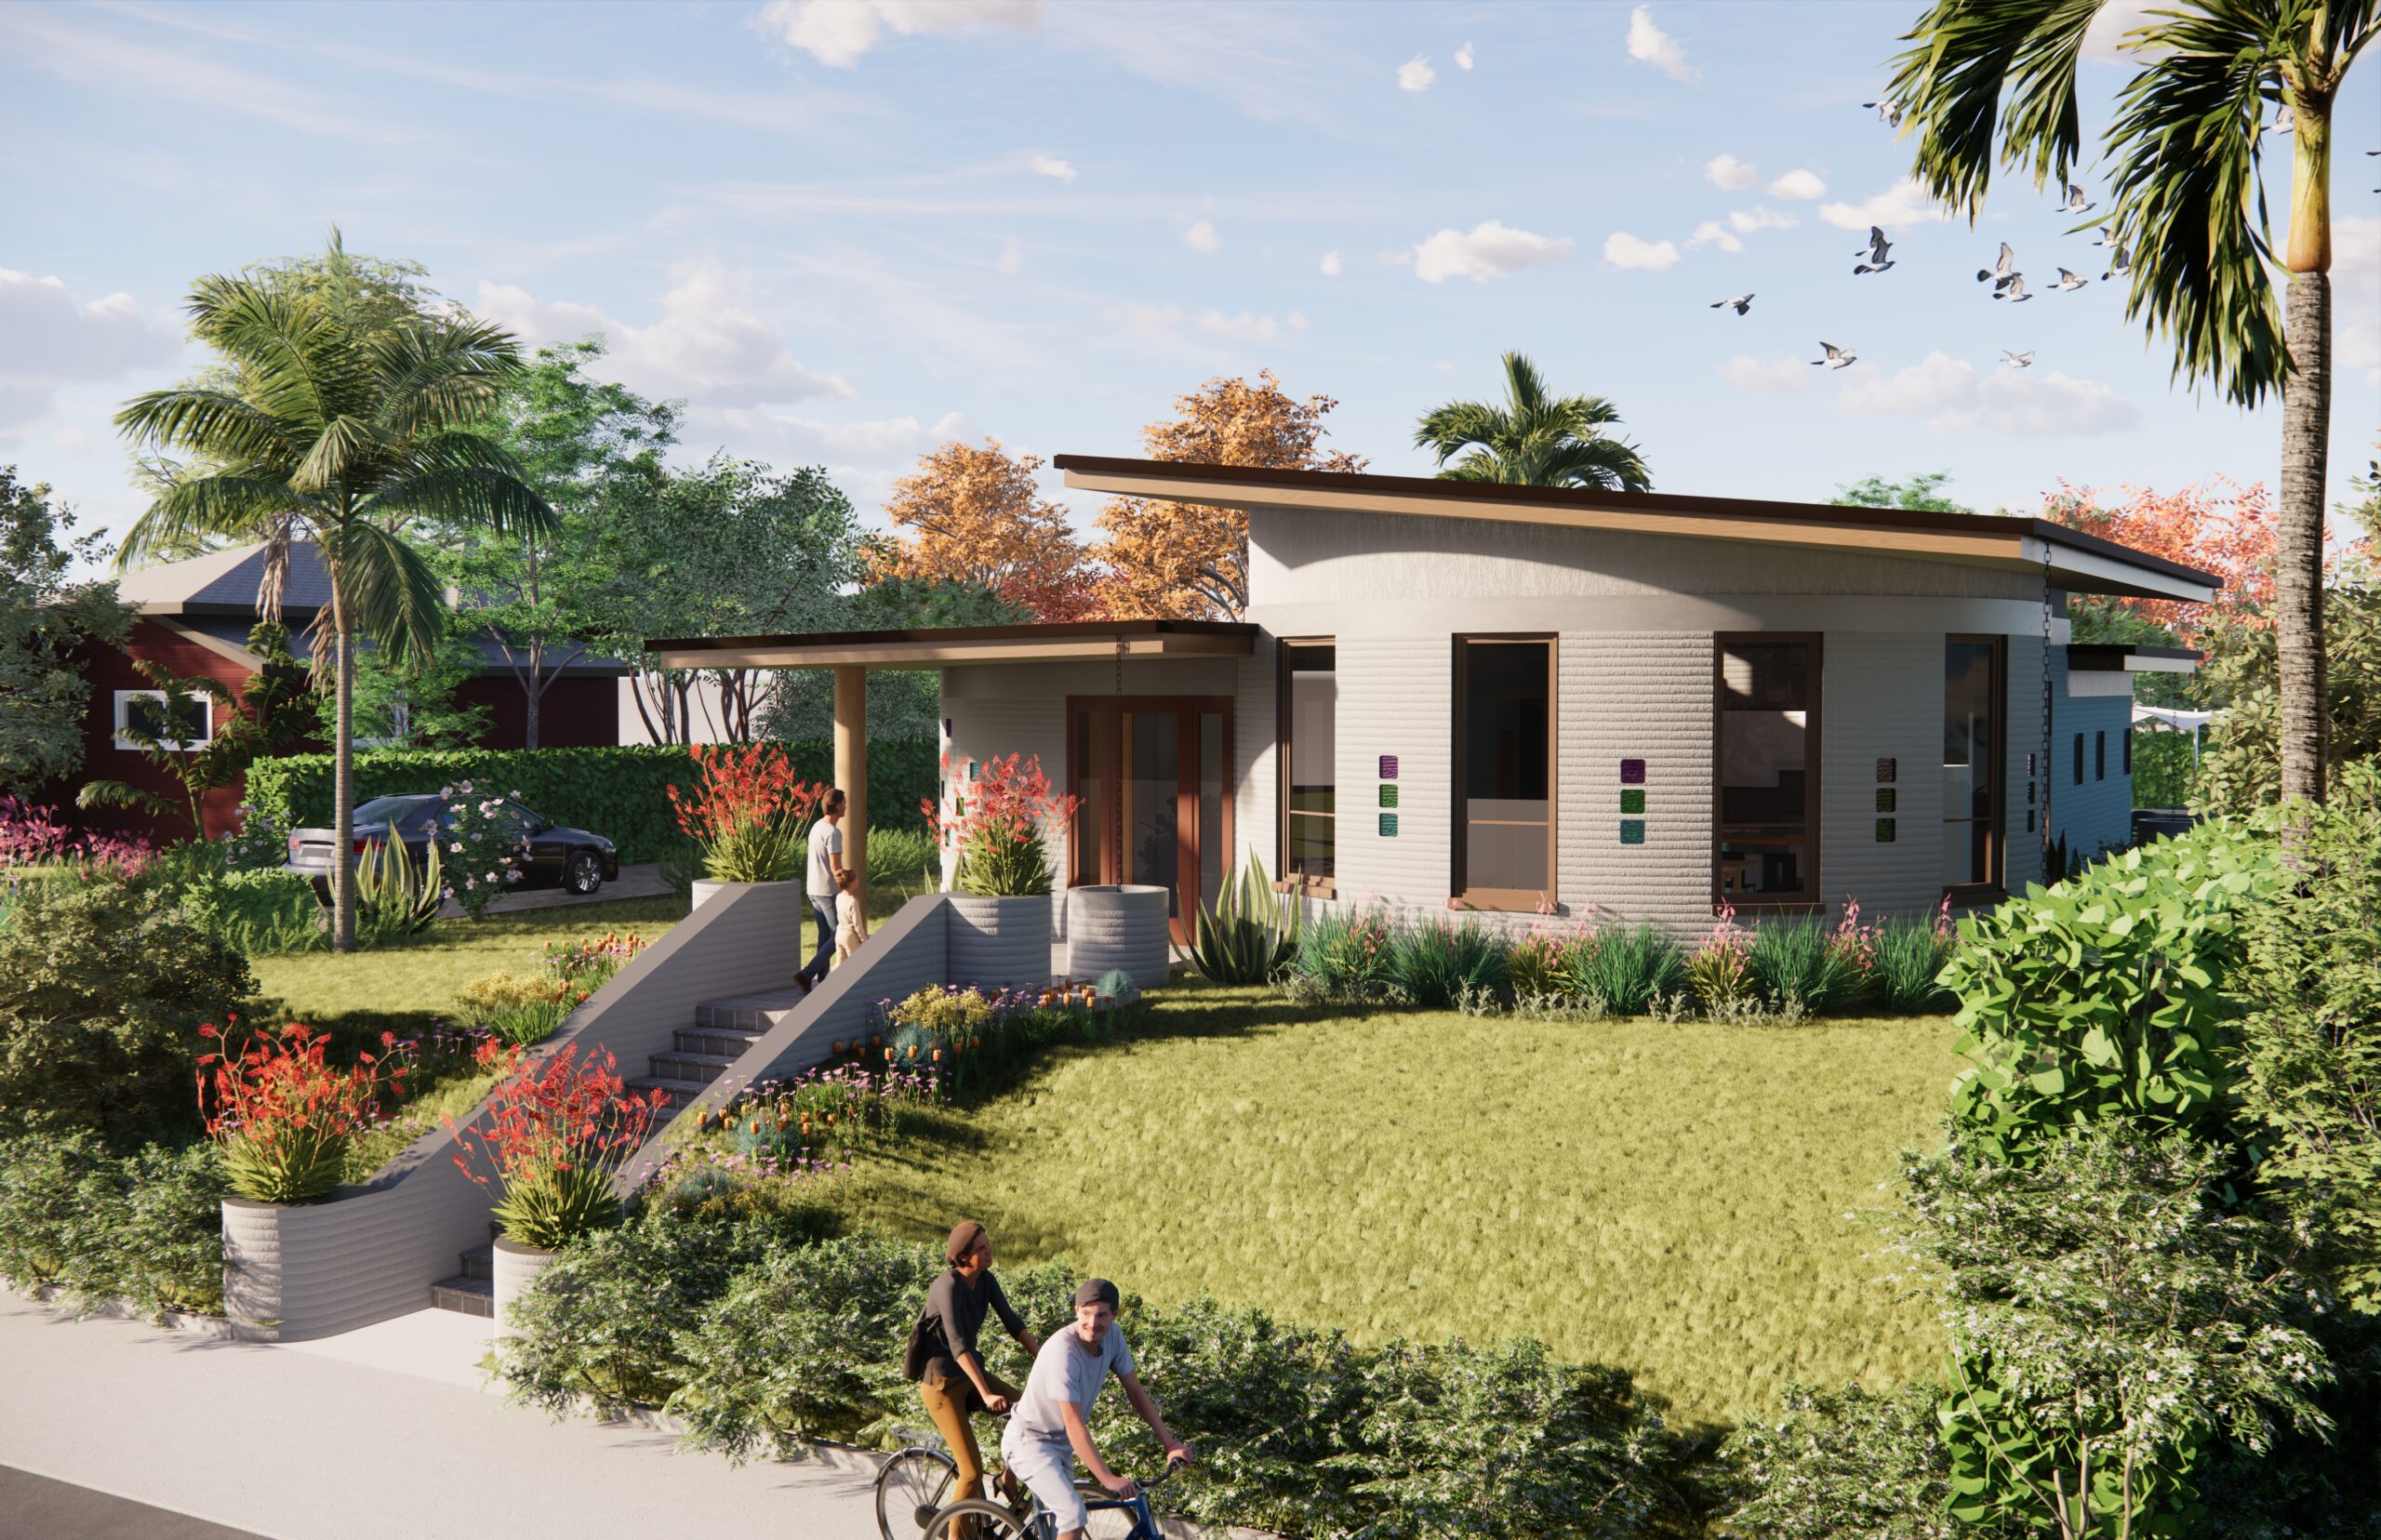 State Funds Seven Transformative Affordable Housing and Climate-Friendly Projects in Santa Barbara County